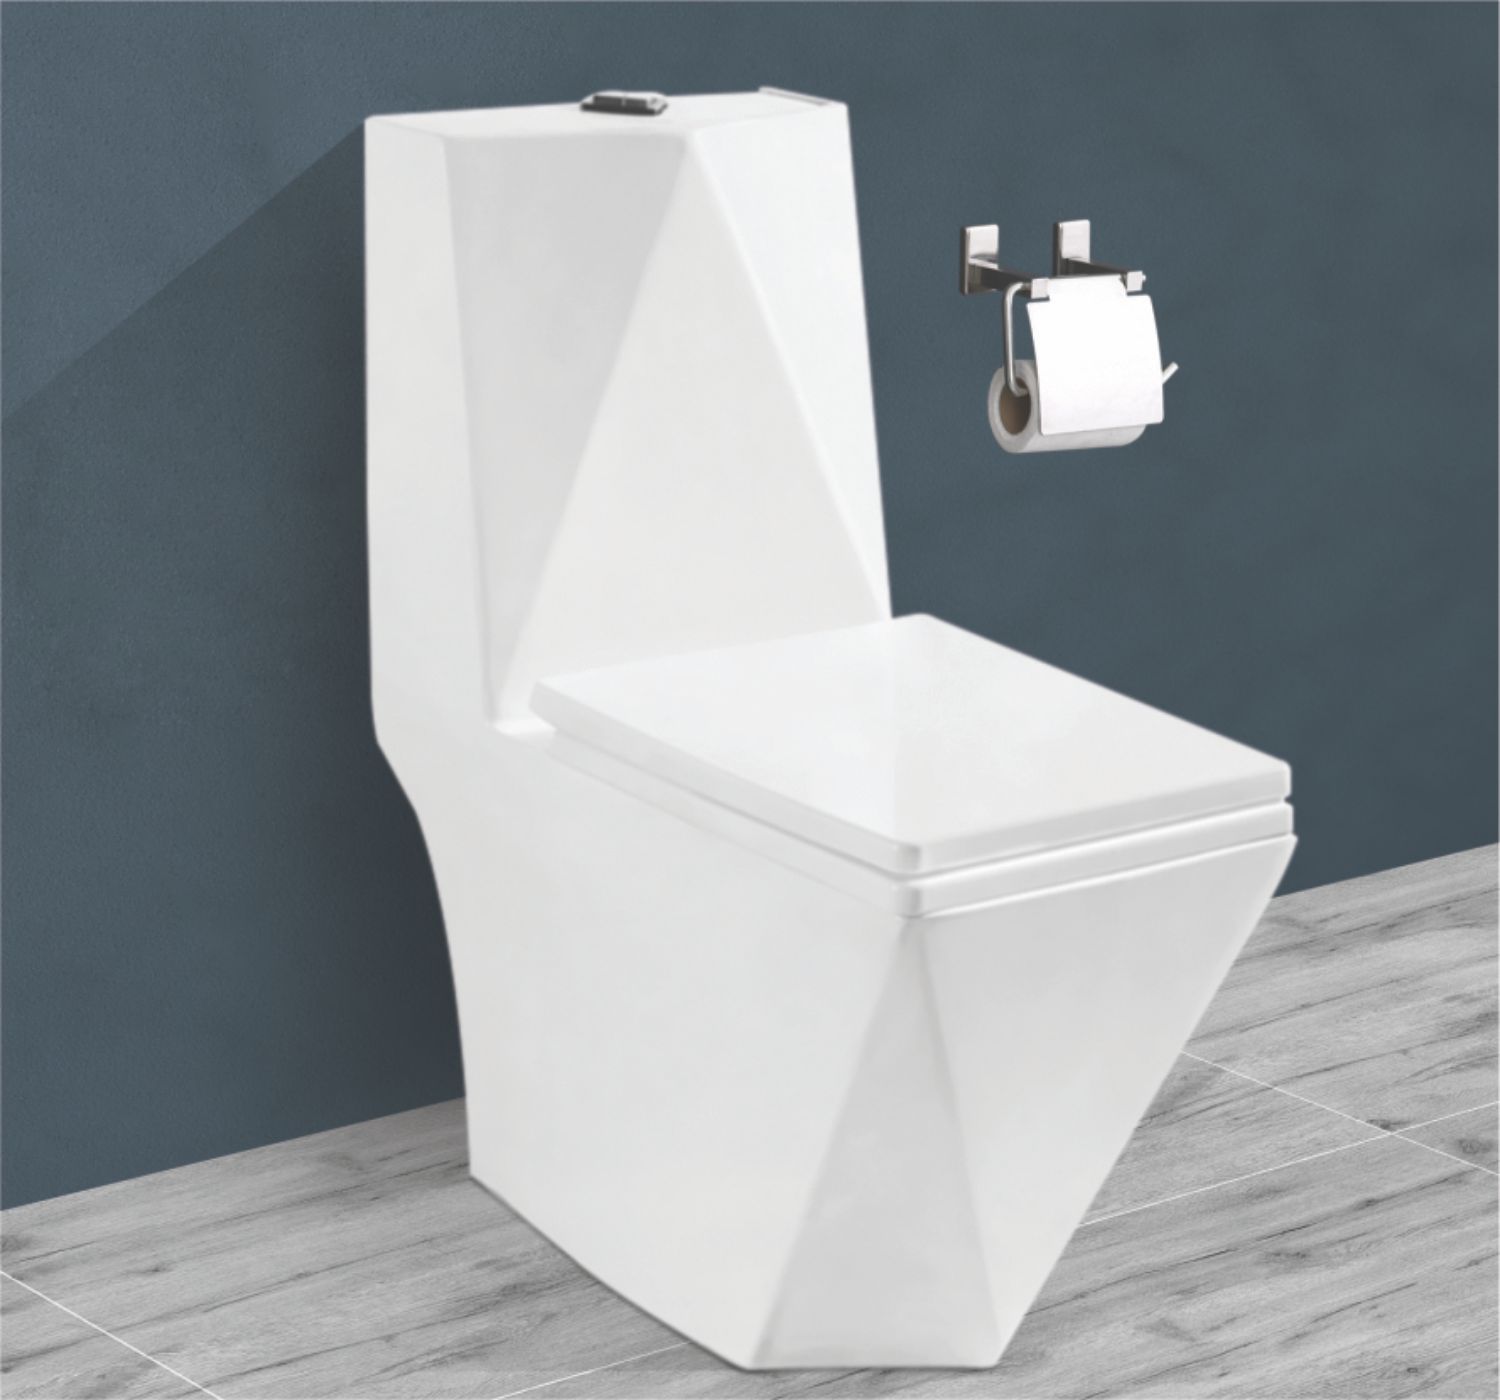 water closet manufacturer and supplier from India